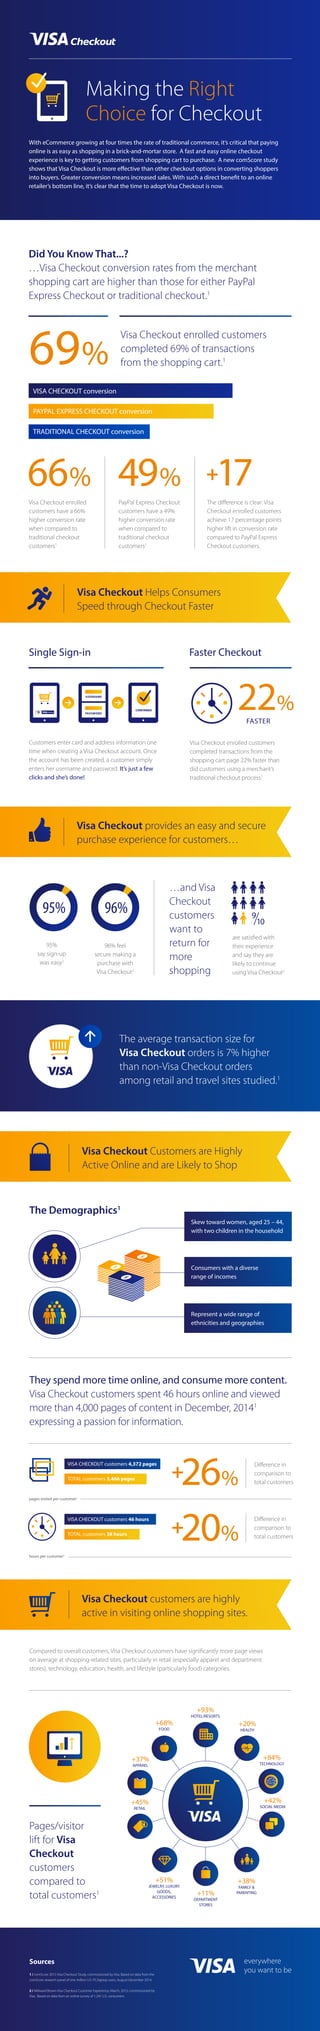 Making the Right
Choice for Checkout
With eCommerce growing at four times the rate of traditional commerce, it’s critical that paying
online is as easy as shopping in a brick-and-mortar store. A fast and easy online checkout
experience is key to getting customers from shopping cart to purchase. A new comScore study
shows that Visa Checkout is more effective than other checkout options in converting shoppers
into buyers. Greater conversion means increased sales. With such a direct benefit to an online
retailer’s bottom line, it’s clear that the time to adopt Visa Checkout is now.
Visa Checkout Helps Consumers
Speed through Checkout Faster
Single Sign-in Faster Checkout
Customers enter card and address information one
time when creating a Visa Checkout account. Once
the account has been created, a customer simply
enters her username and password. It’s just a few
clicks and she’s done!
Did You Know That...?
…Visa Checkout conversion rates from the merchant
shopping cart are higher than those for either PayPal
Express Checkout or traditional checkout.1
Visa Checkout enrolled customers
completed 69% of transactions
from the shopping cart.1
The diﬀerence is clear: Visa
Checkout enrolled customers
achieve 17 percentage points
higher lift in conversion rate
compared to PayPal Express
Checkout customers.
FASTER
PayPal Express Checkout
customers have a 49%
higher conversion rate
when compared to
traditional checkout
customers1
95%
say sign-up
was easy2
Visa Checkout enrolled customers
completed transactions from the
shopping cart page 22% faster than
did customers using a merchant’s
traditional checkout process1
VISA CHECKOUT conversion
TRADITIONAL CHECKOUT conversion
Visa Checkout provides an easy and secure
purchase experience for customers…
…and Visa
Checkout
customers
want to
return for
more
shopping
Visa Checkout Customers are Highly
Active Online and are Likely to Shop
The Demographics1
Visa Checkout customers are highly
active in visiting online shopping sites.
are satisﬁed with
their experience
and say they are
likely to continue
using Visa Checkout2
96% feel
secure making a
purchase with
Visa Checkout2
95% 96%
Skew toward women, aged 25 – 44,
with two children in the household
Consumers with a diverse
range of incomes
Represent a wide range of
ethnicities and geographies
They spend more time online, and consume more content.
Visa Checkout customers spent 46 hours online and viewed
more than 4,000 pages of content in December, 20141
expressing a passion for information.
Compared to overall customers, Visa Checkout customers have signiﬁcantly more page views
on average at shopping-related sites, particularly in retail (especially apparel and department
stores), technology, education, health, and lifestyle (particularly food) categories.
Pages/visitor
lift for Visa
Checkout
customers
compared to
total customers1
Diﬀerence in
comparison to
total customers
Diﬀerence in
comparison to
total customers
VISA CHECKOUT customers 46 hours
TOTAL customers 38 hours
Sources
1 / comScore 2015 Visa Checkout Study, commissioned by Visa. Based on data from the
comScore research panel of one million U.S. PC/laptop users, August-December 2014.
2 / Millward Brown Visa Checkout Customer Experience, March, 2015; commissioned by
Visa. Based on data from an online survey of 1,241 U.S. consumers.
VISA CHECKOUT customers 4,372 pages
TOTAL customers 3,466 pages
hours per customer1
pages visited per customer1
PAYPAL EXPRESS CHECKOUT conversion
Visa Checkout enrolled
customers have a 66%
higher conversion rate
when compared to
traditional checkout
customers1
CONFIRMED
The average transaction size for
Visa Checkout orders is 7% higher
than non-Visa Checkout orders
among retail and travel sites studied.1
+68%
FOOD
+20%
HEALTH
+38%
FAMILY &
PARENTING
+51%
JEWELRY, LUXURY
GOODS,
ACCESSORIES
+42%
SOCIAL MEDIA
+11%
DEPARTMENT
STORES
+37%
APPAREL
+84%
TECHNOLOGY
+93%
HOTEL/RESORTS
+45%
RETAIL
USERNAME
PASSWORD
 